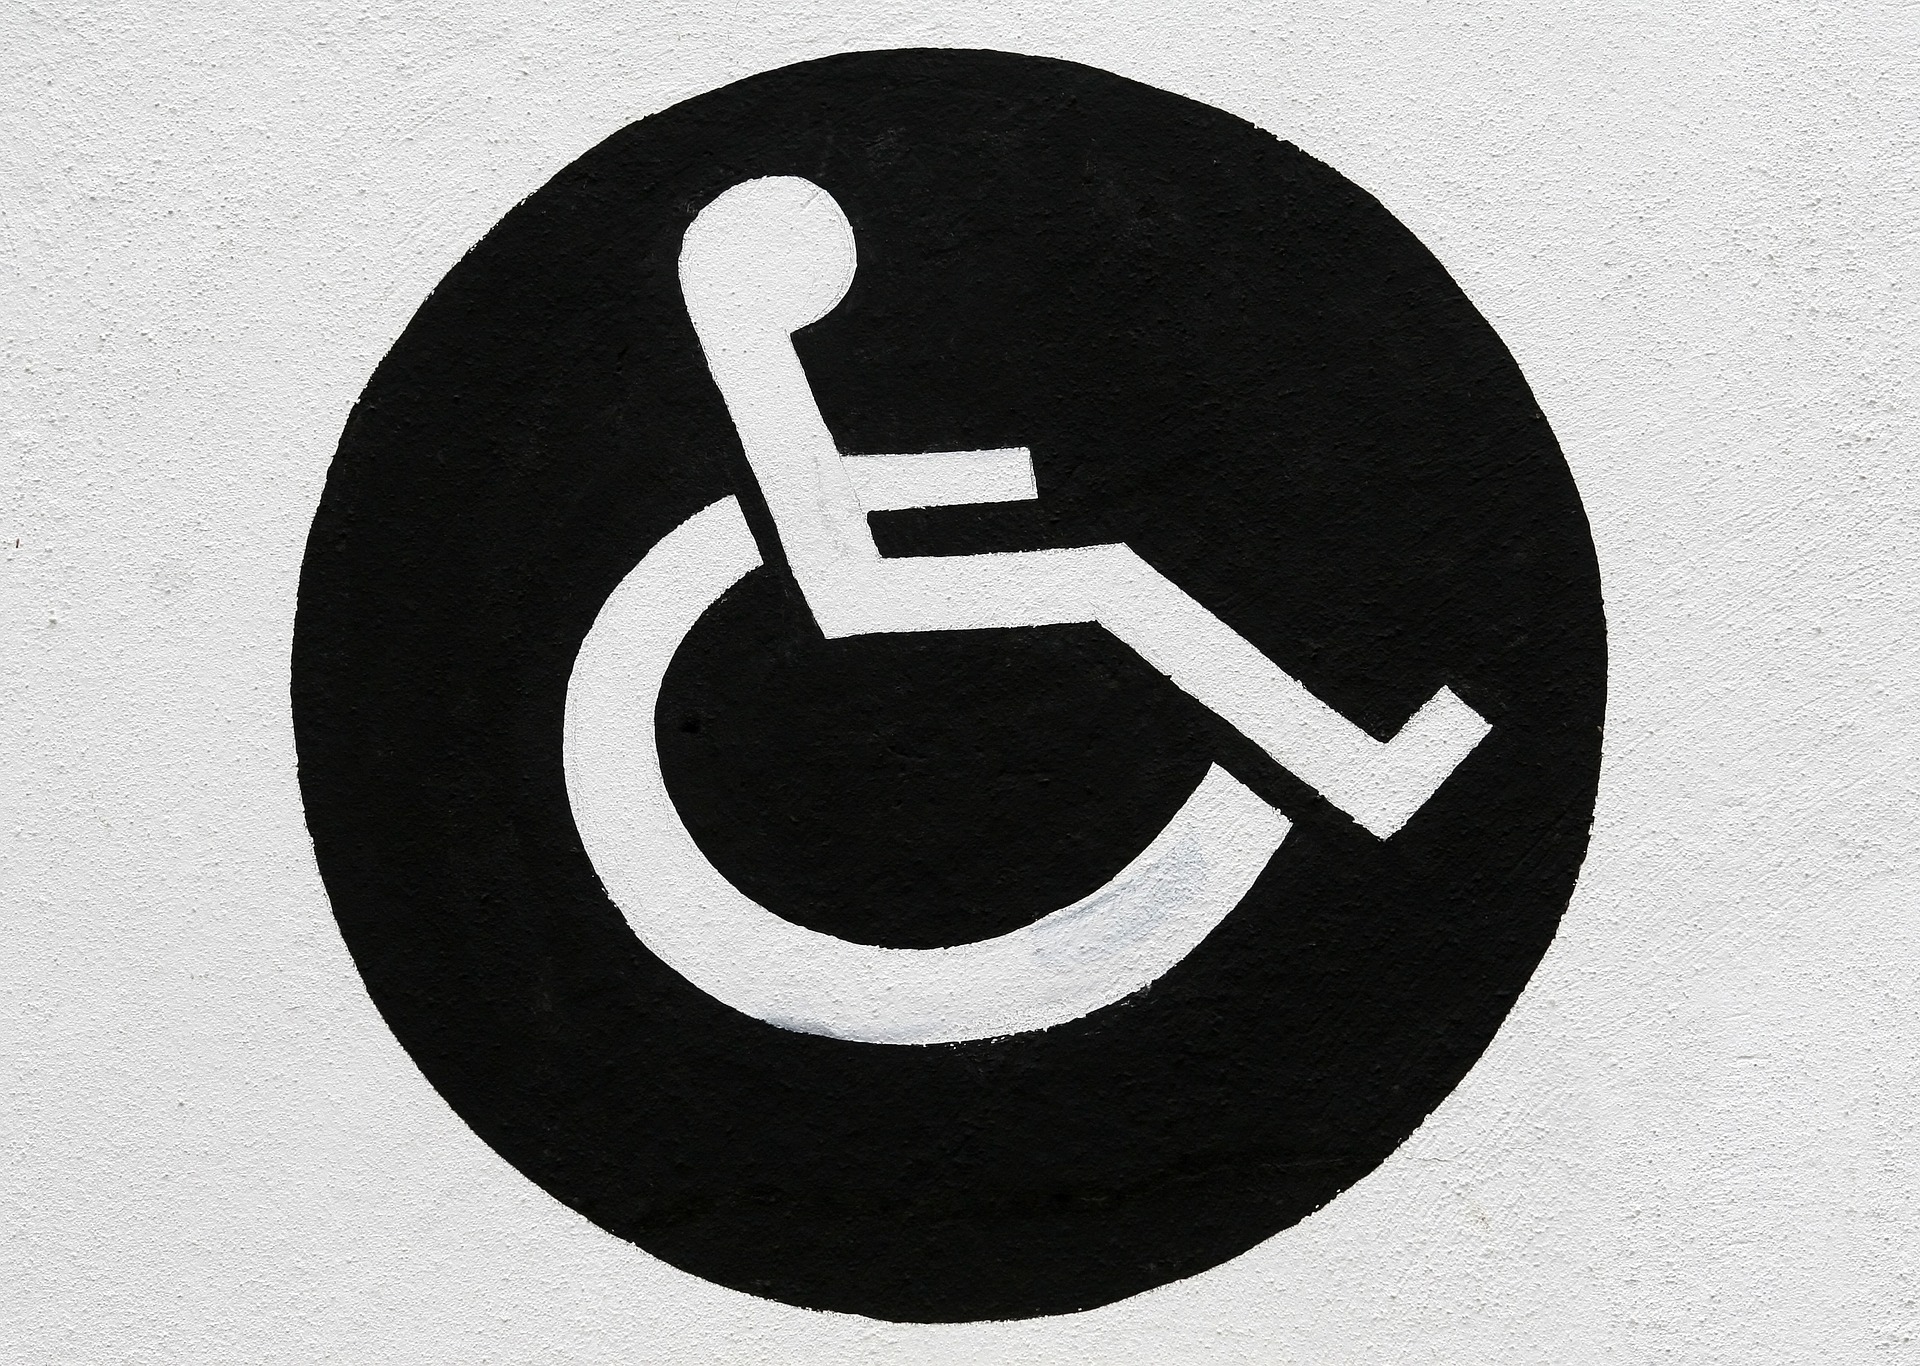 PWD car stickers for parking sought